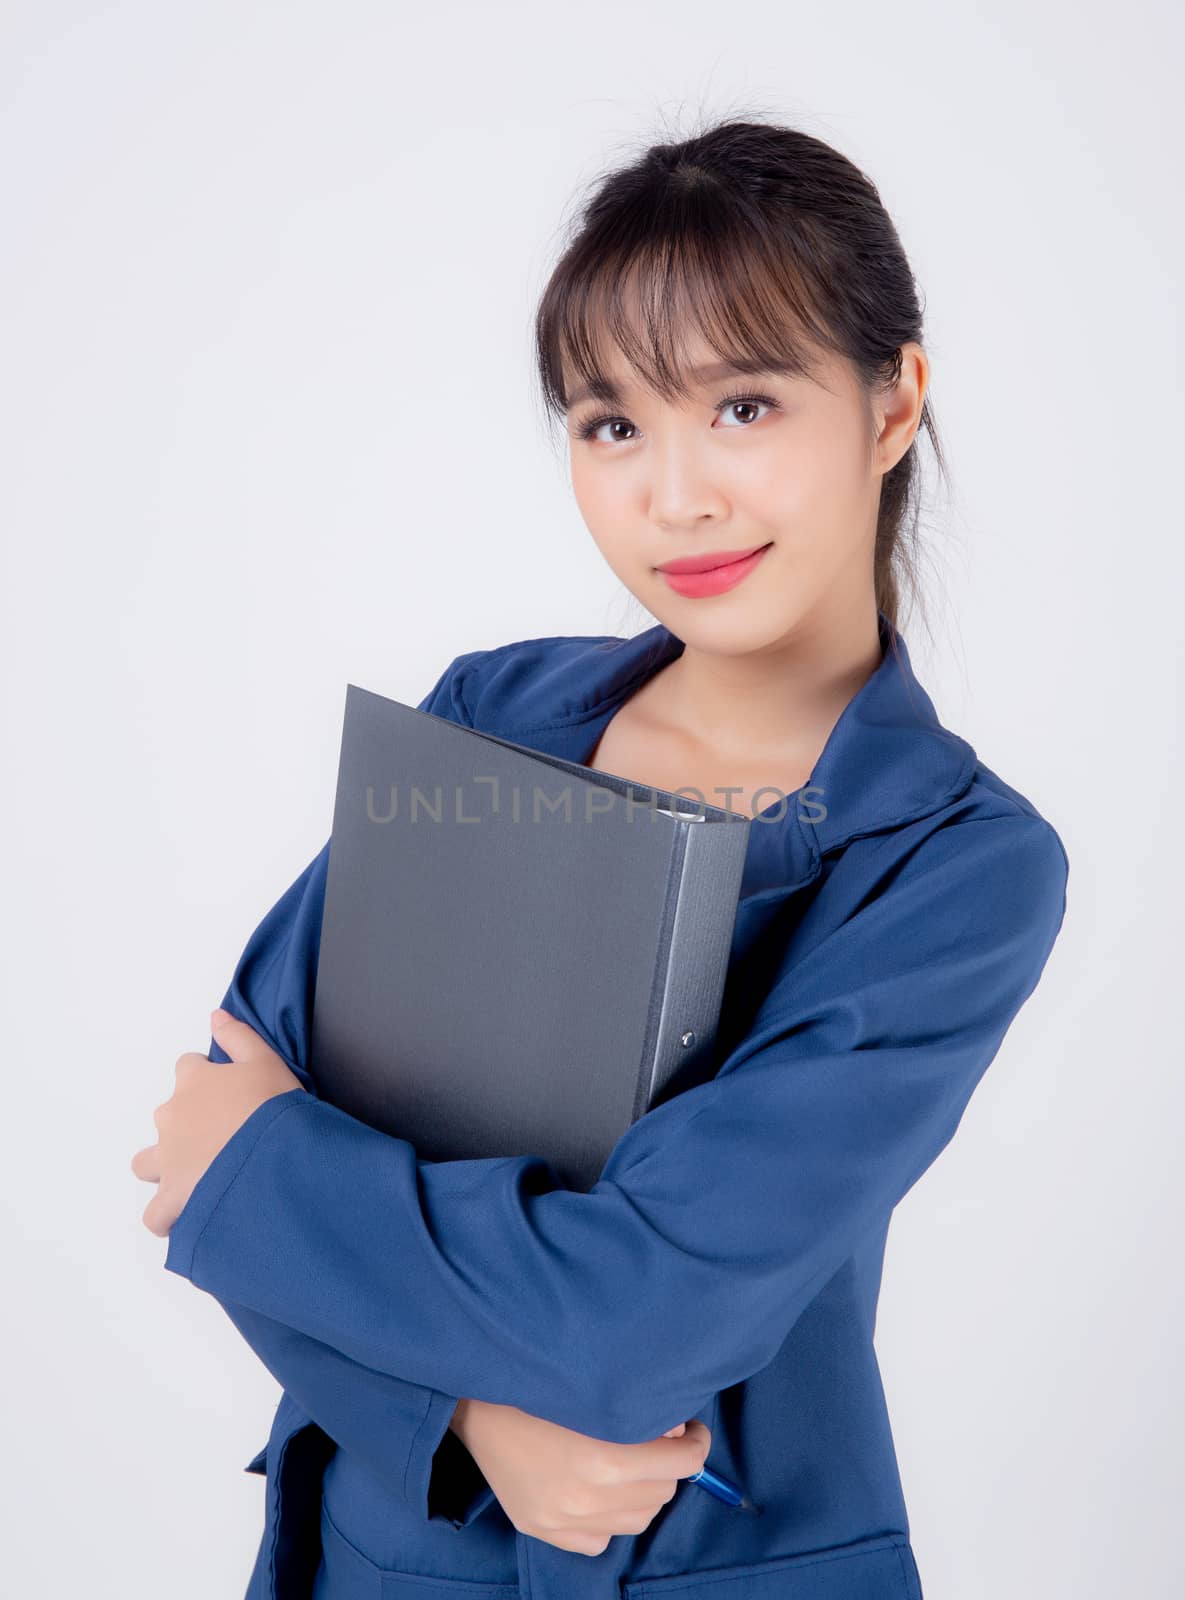 beautiful portrait young business asian woman cheerful standing holding folder isolated on white background, asia businesswoman confident secretary work holding document file with success.